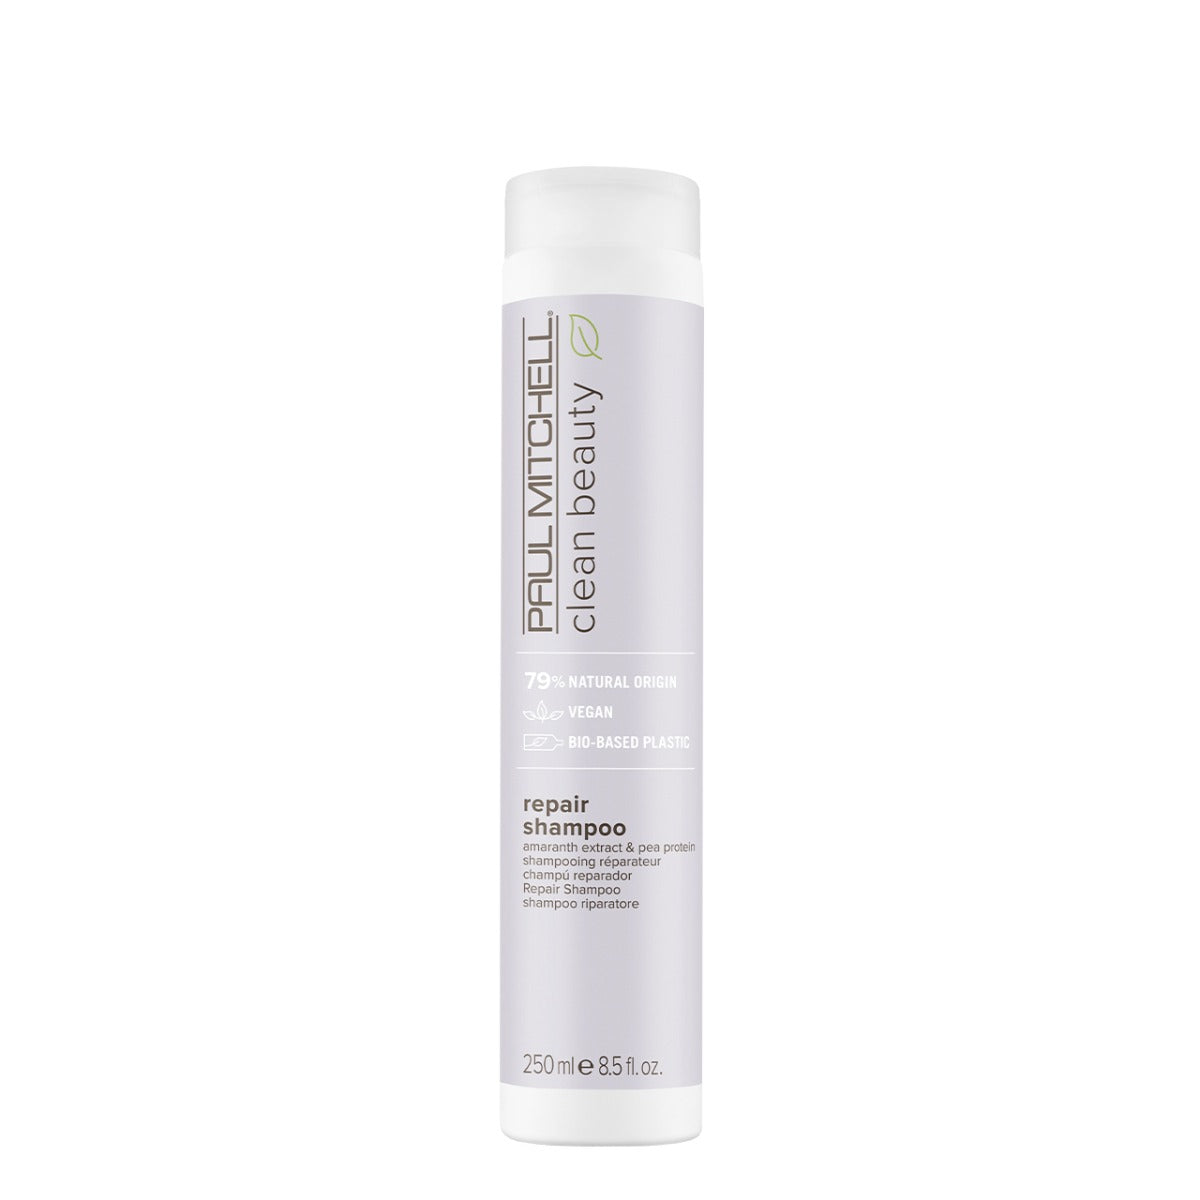 Clean Beauty Repair Shampoo - by Paul Mitchell |ProCare Outlet|